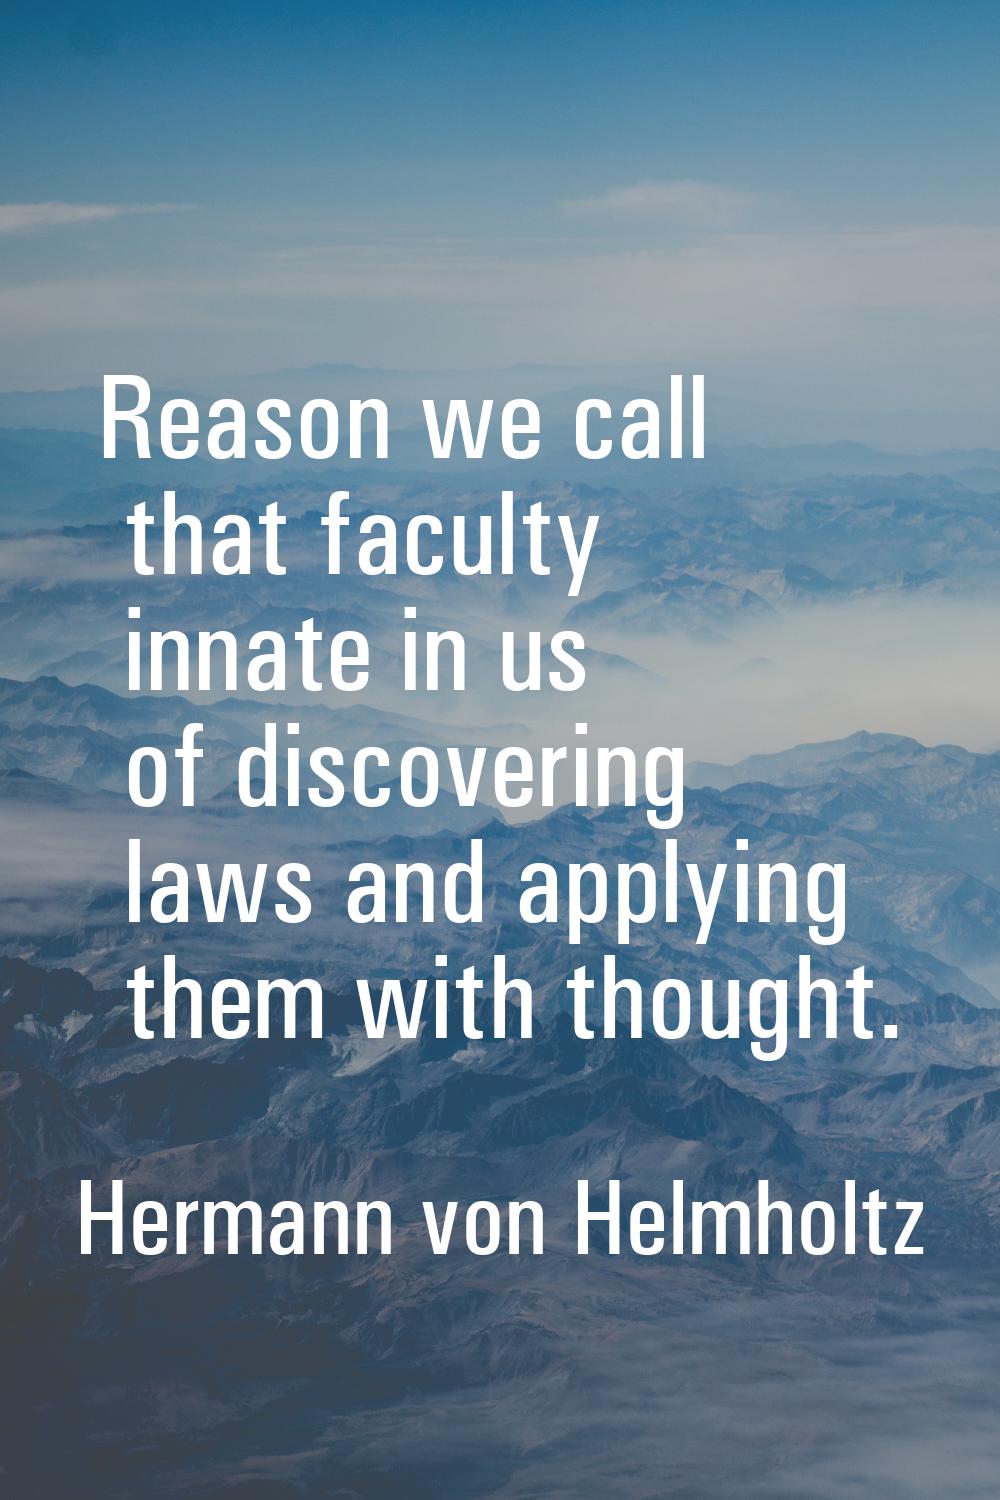 Reason we call that faculty innate in us of discovering laws and applying them with thought.